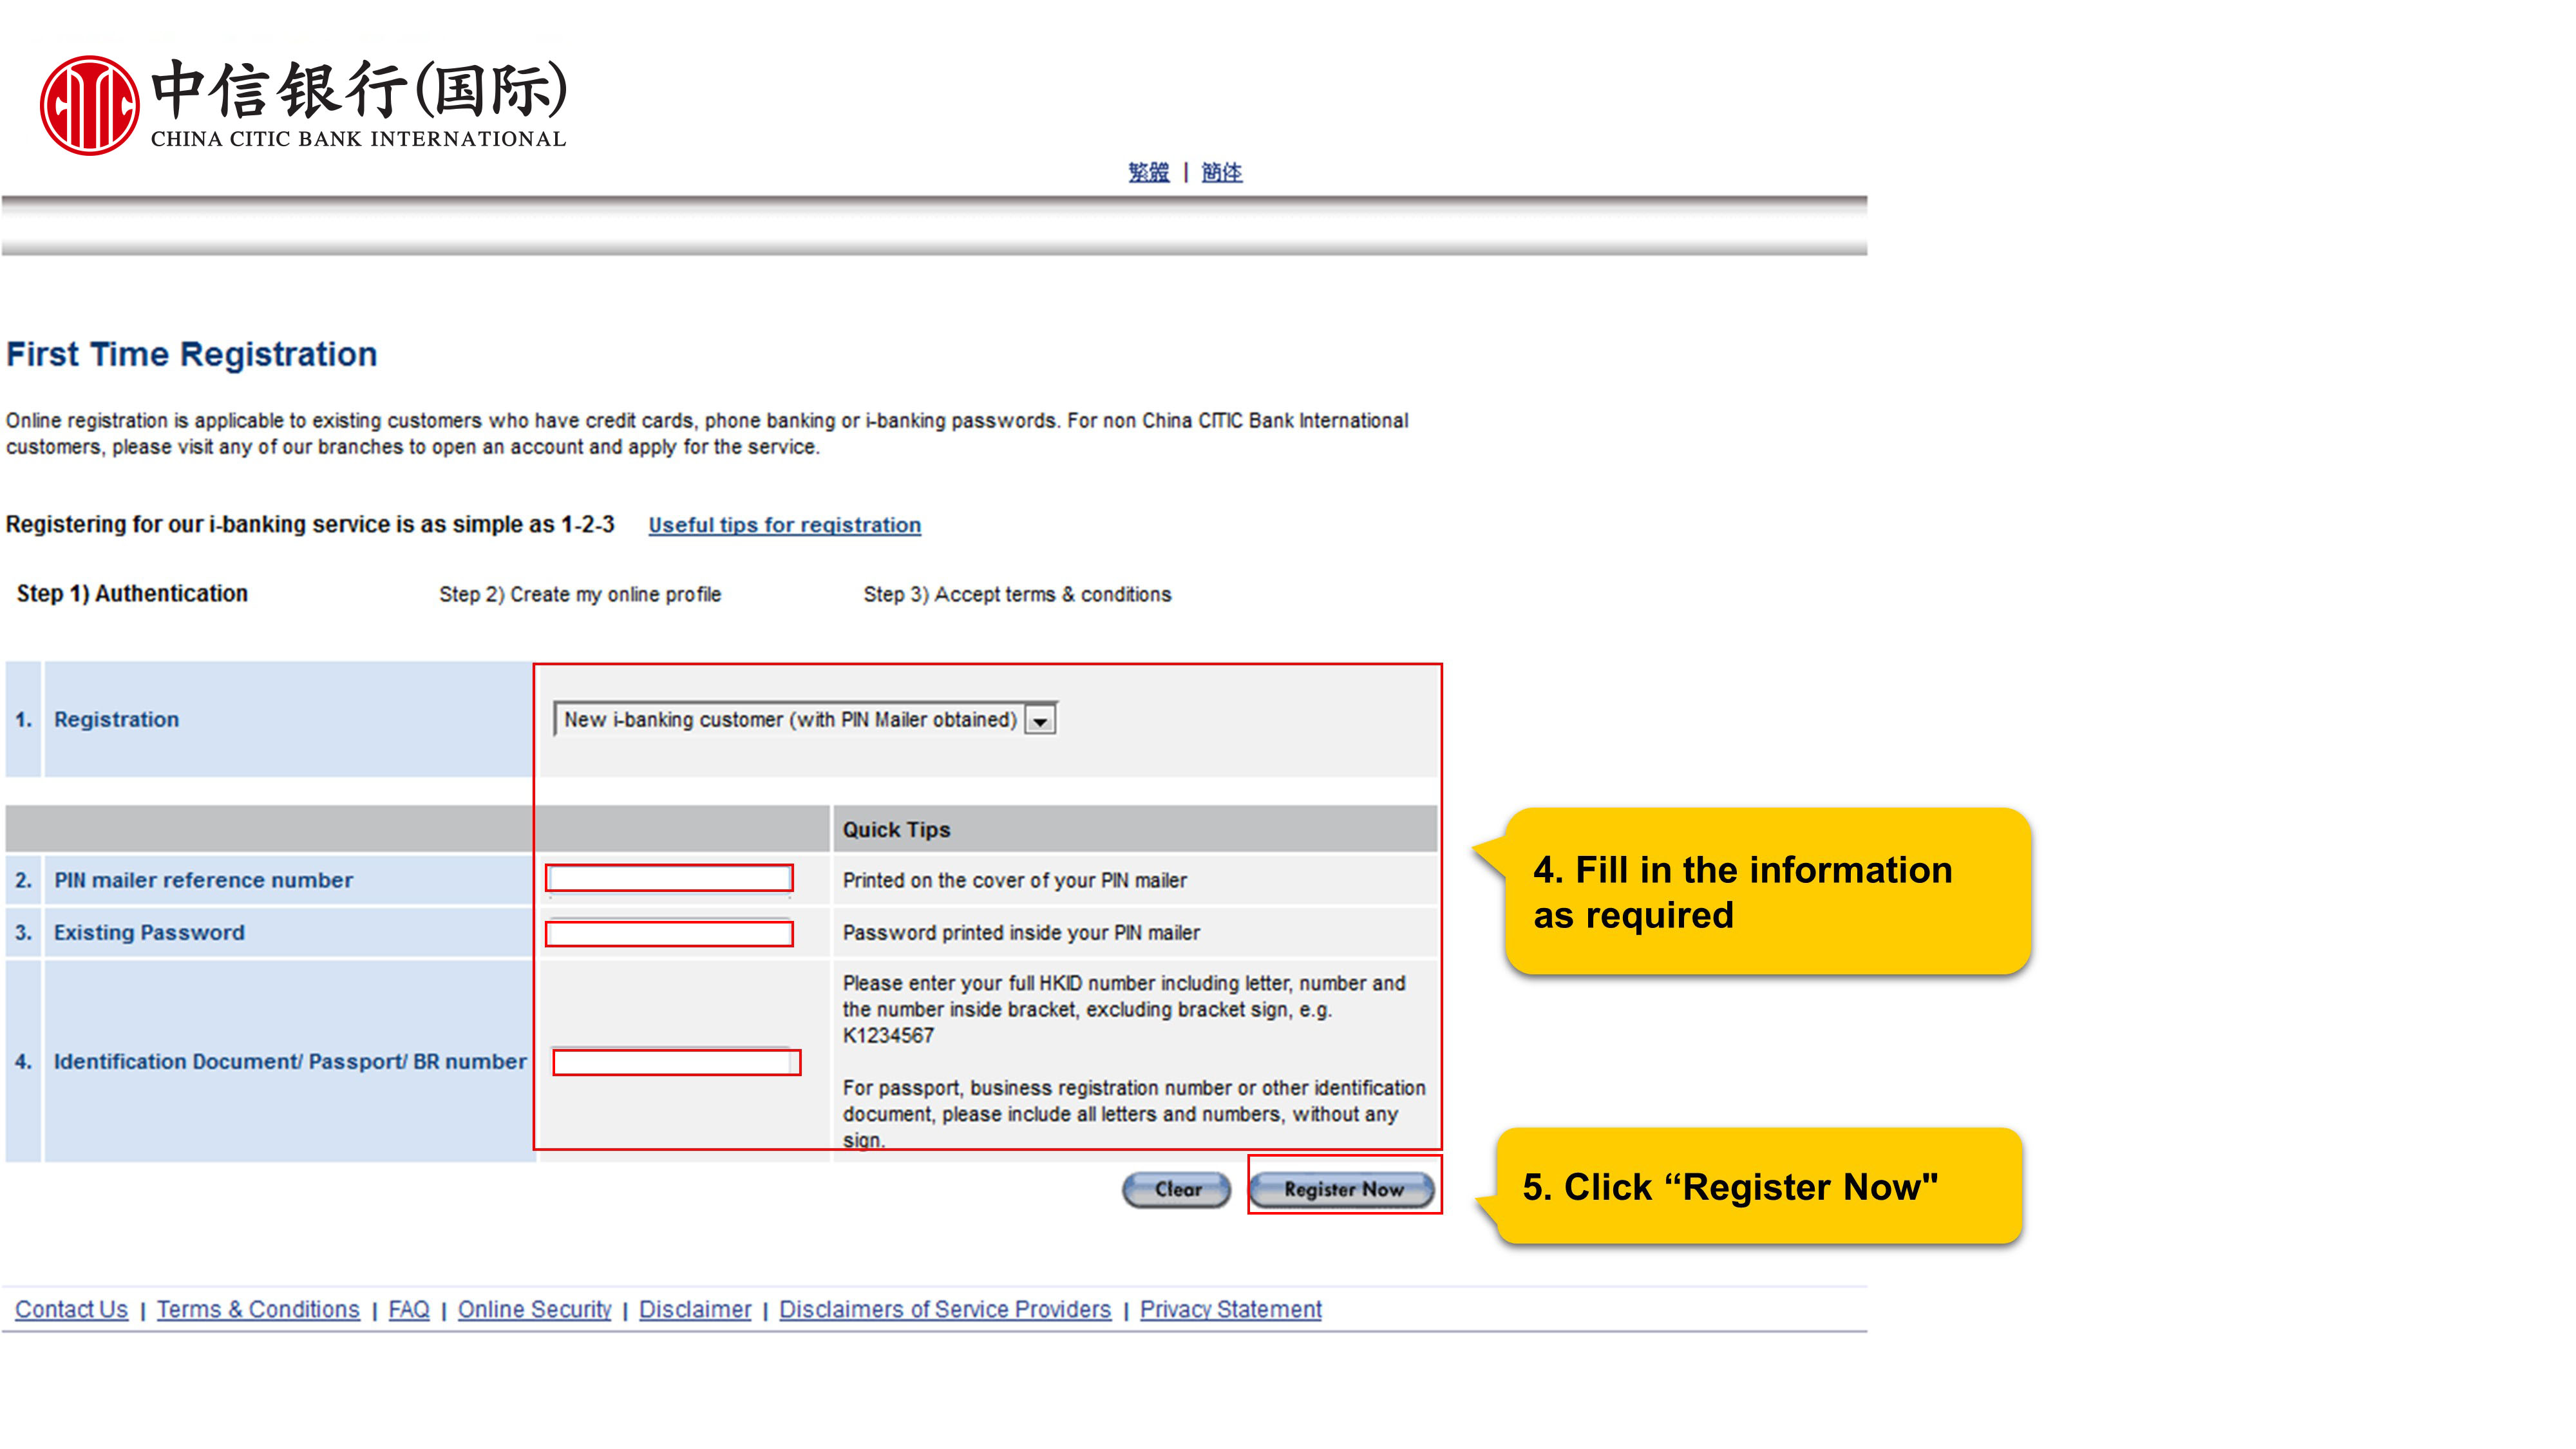 4. Fill in the information as required 5. Click "Register Now"